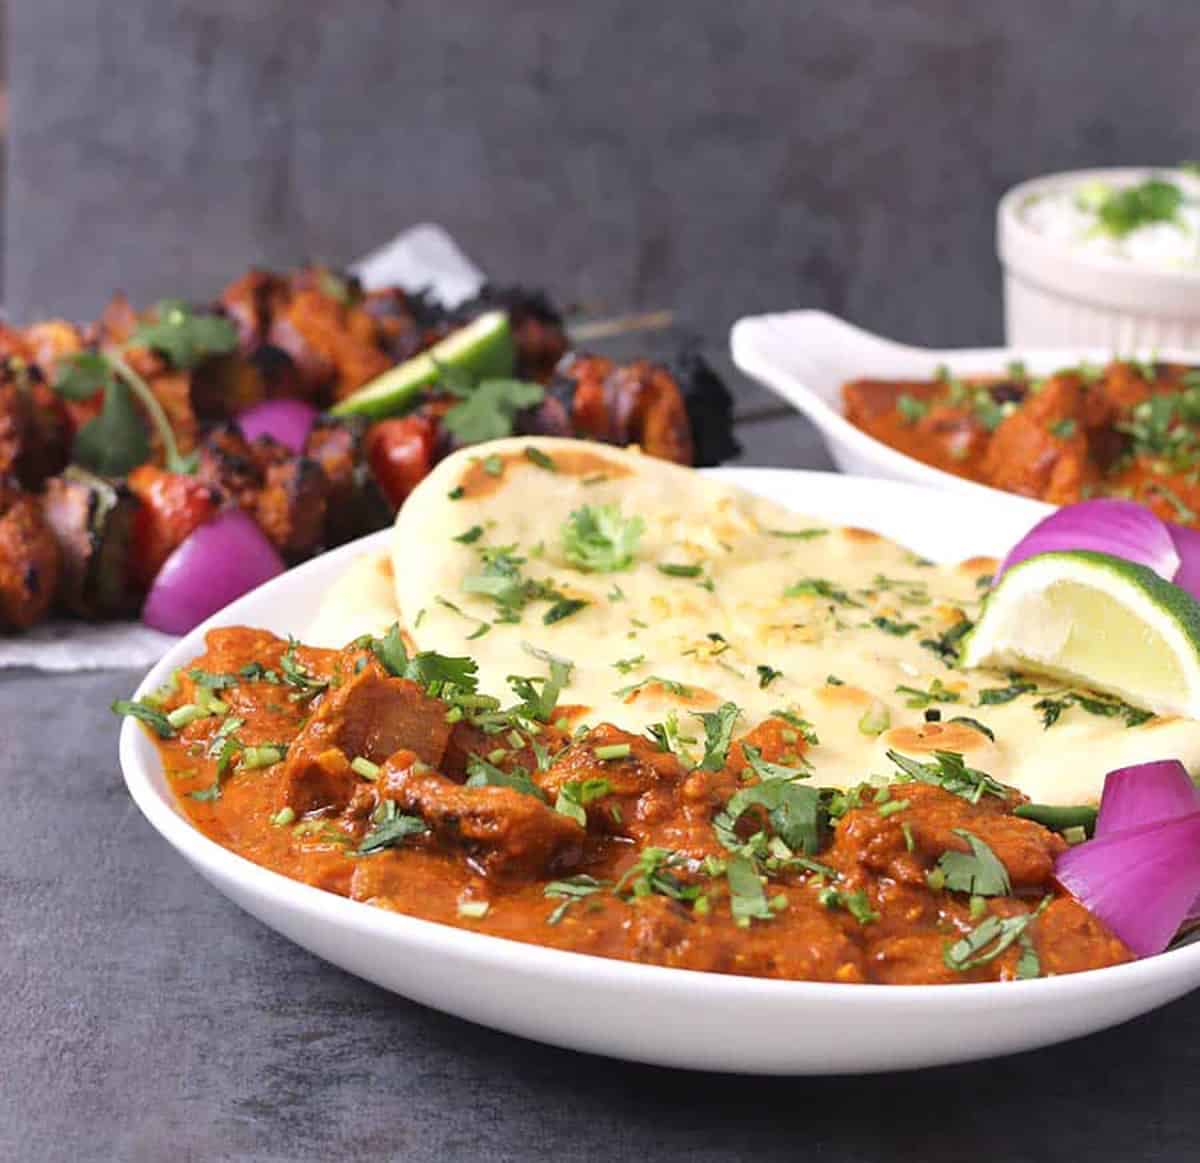 Delicious homemade chicken tikka masala serve in a white plate along with naan bread, red onion slices and a lemon wedge.